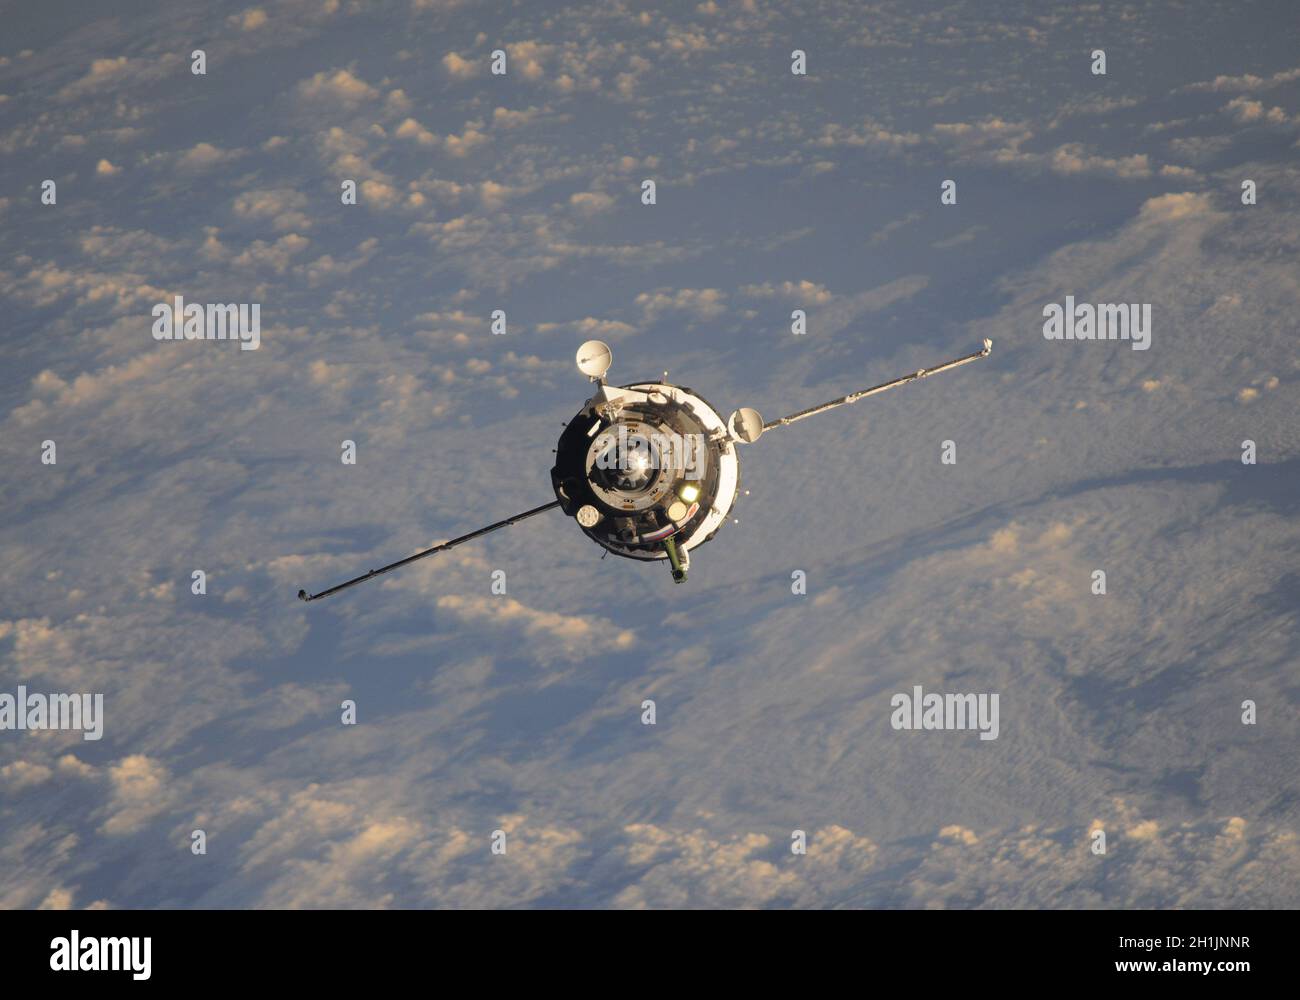 A view of Earth from the International Space Station: Cargo and astronauts approach on this Soyuz module. Ê An optimised and digitally enhanced version of a NASA/ ESA image. Mandatory Credit: NASA/ESA/T. Pesquet. NB: Usage restrictions: Not to be presented as an endorsement. Stock Photo